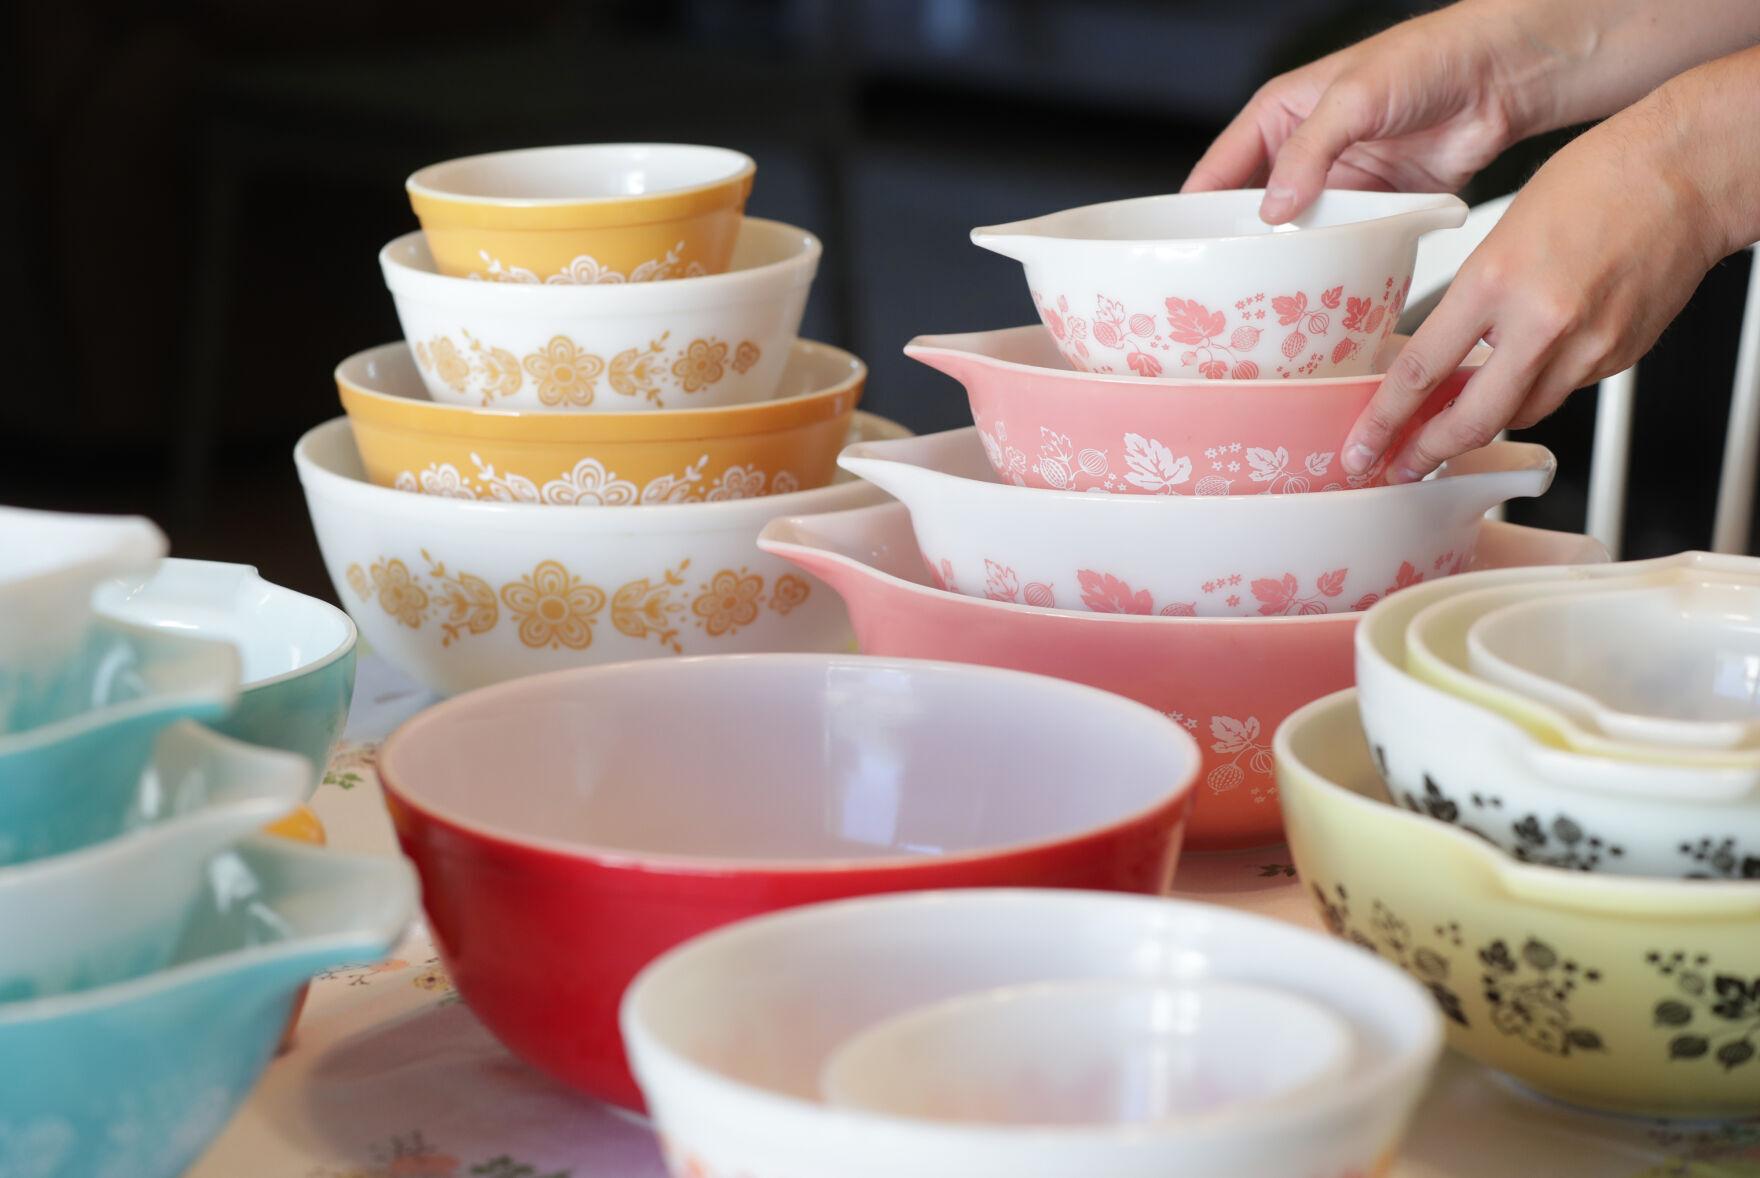 Are you 'Pyrex people'? Find out at a swap of the beloved vintage bakeware